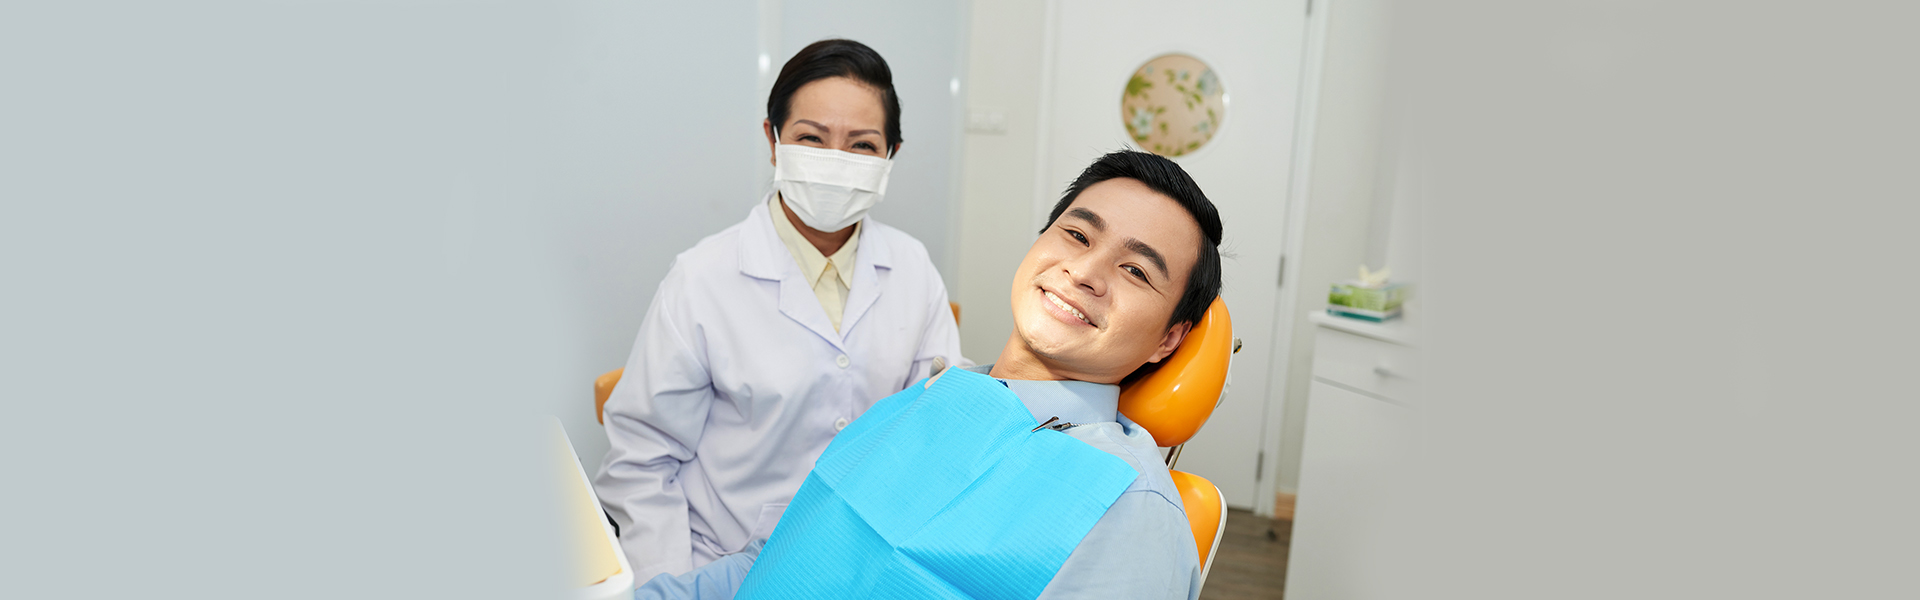 Root Canal Vs. Tooth Extraction: What To Expect